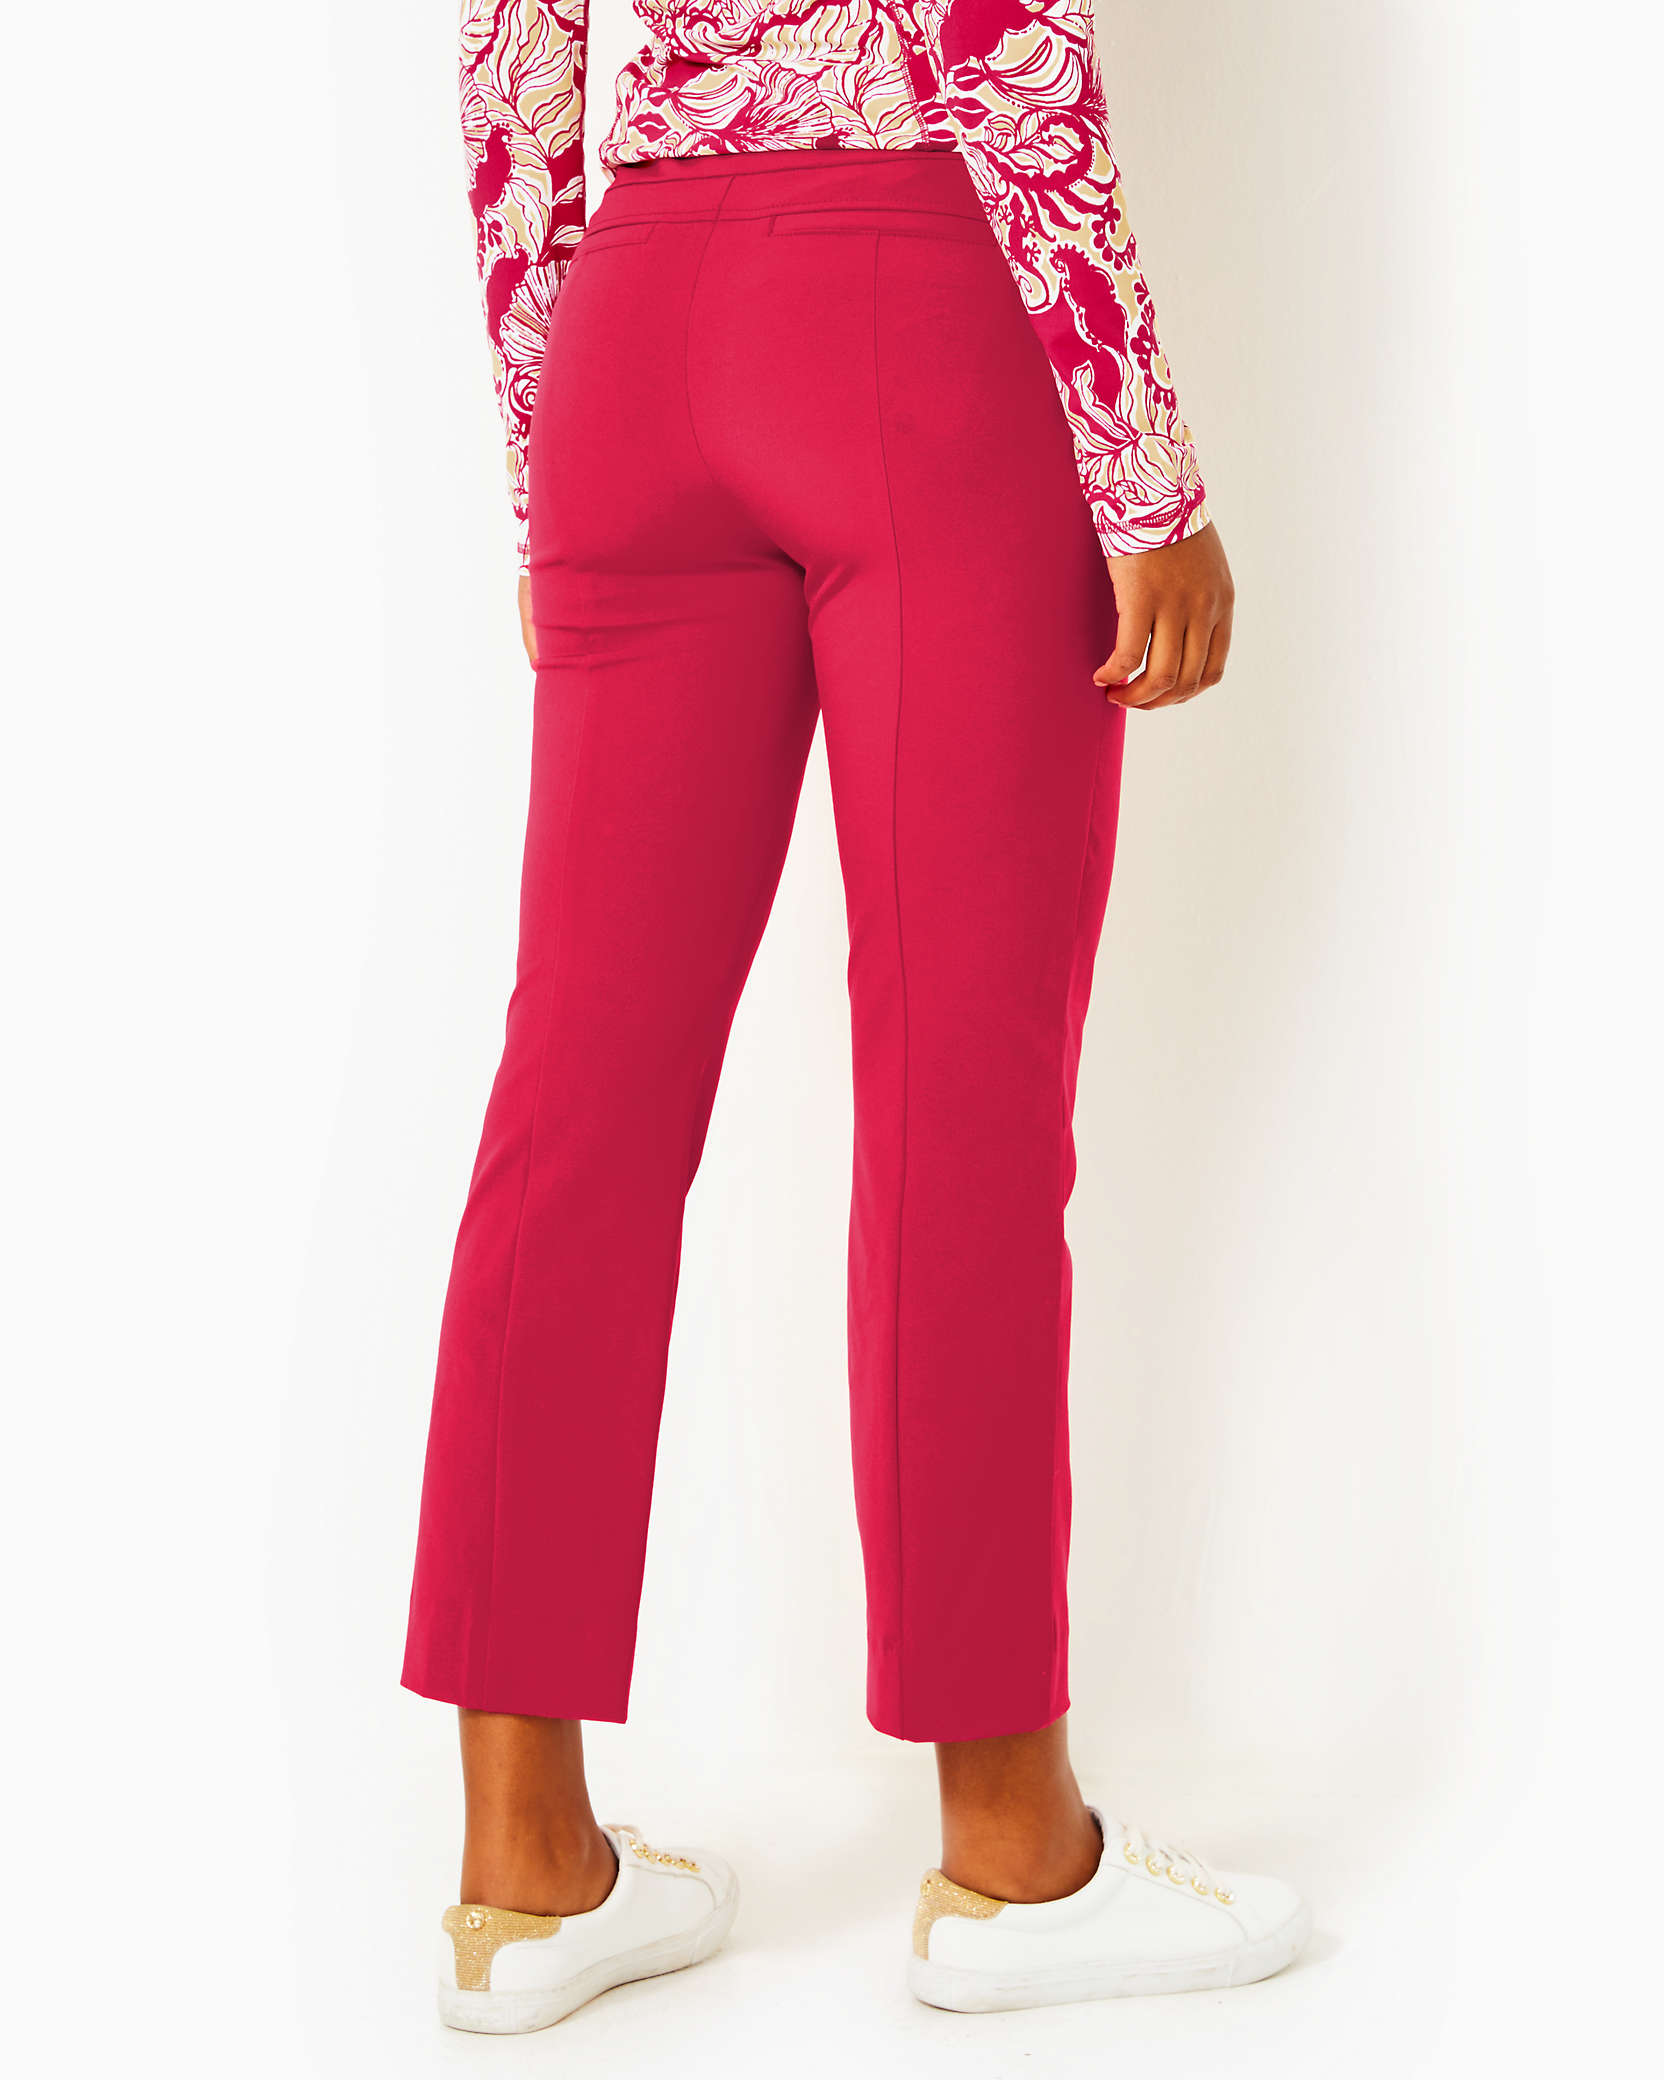 Shop Lilly Pulitzer Upf 50+ Luxletic 28" Alston High Rise Pant In Poinsettia Red